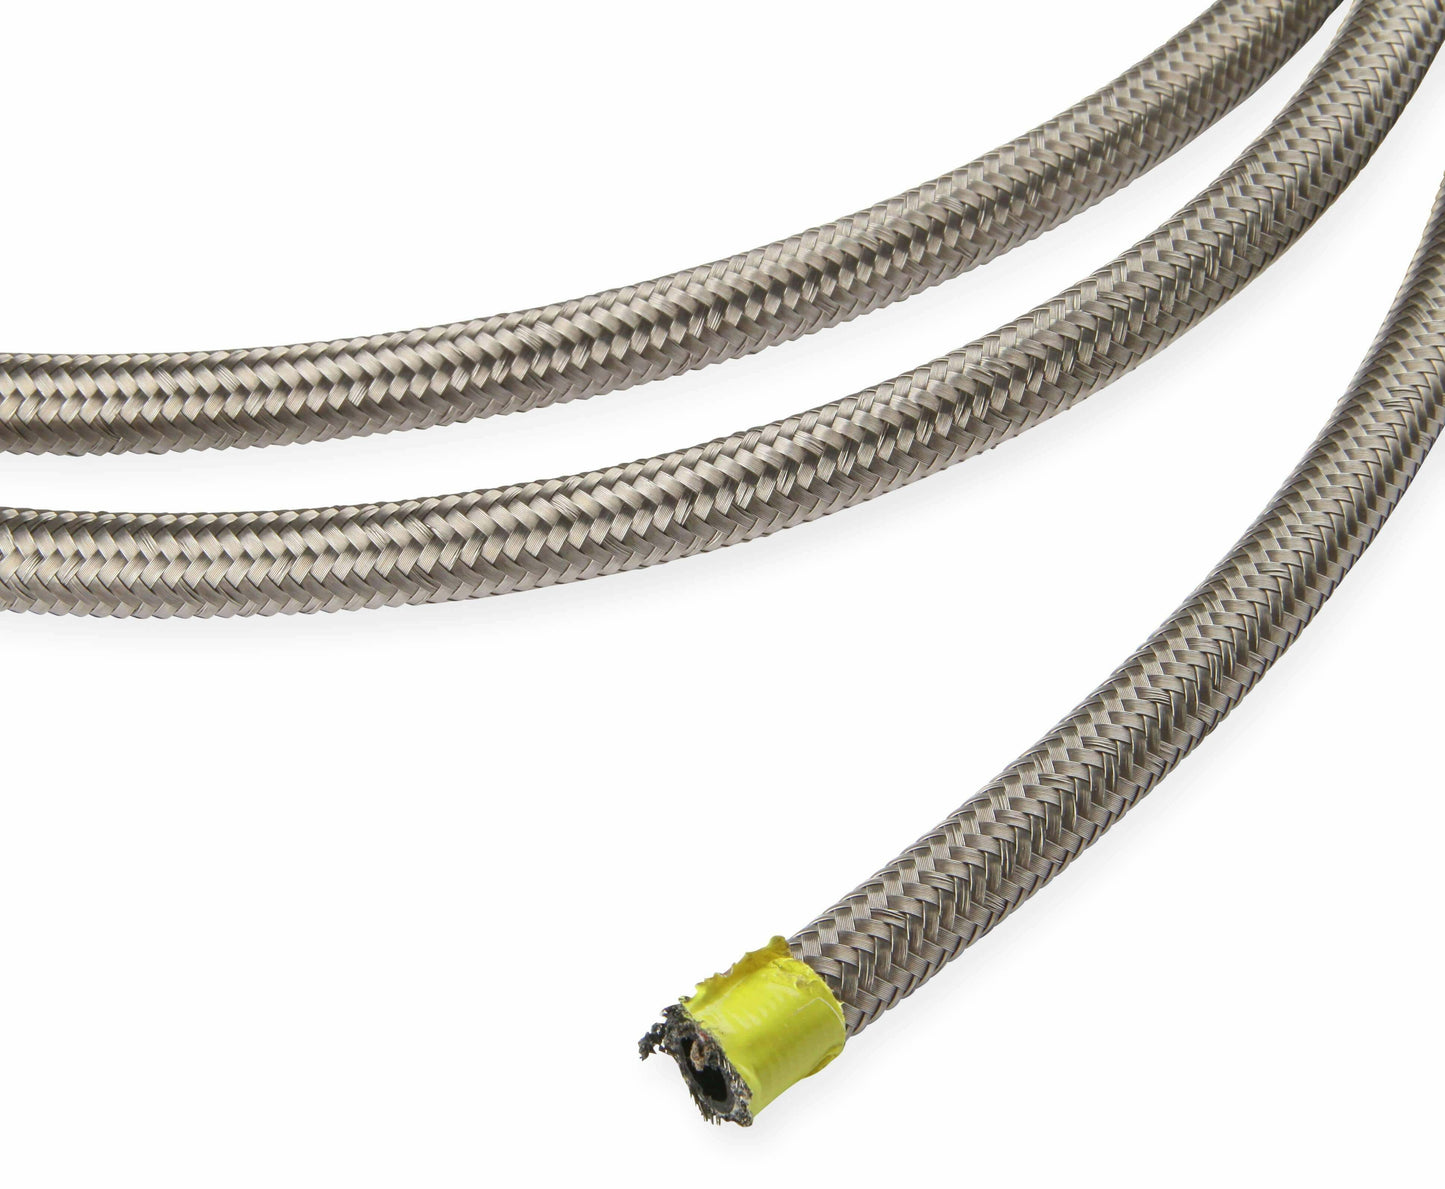 Earls Auto-Flex Hose- Size12 -Sold Per Foot Continuous Length upto 50'-300012ERL